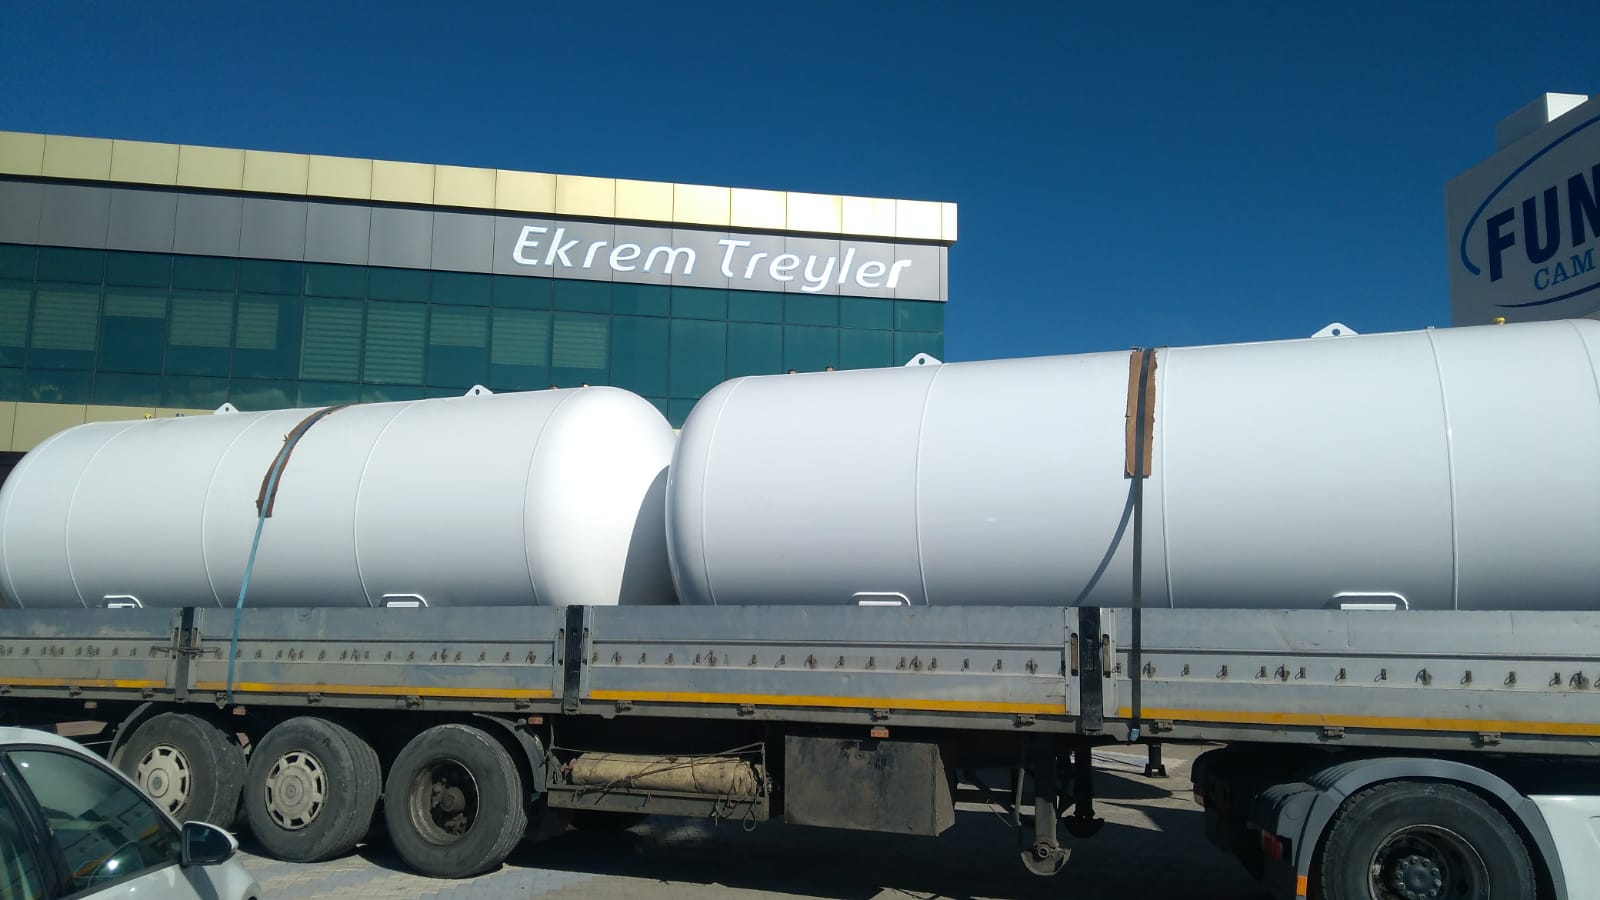 Another 22 m3 Above Ground Lpg Skid tank delivery to Nigeria 05.03.2019 EN Design